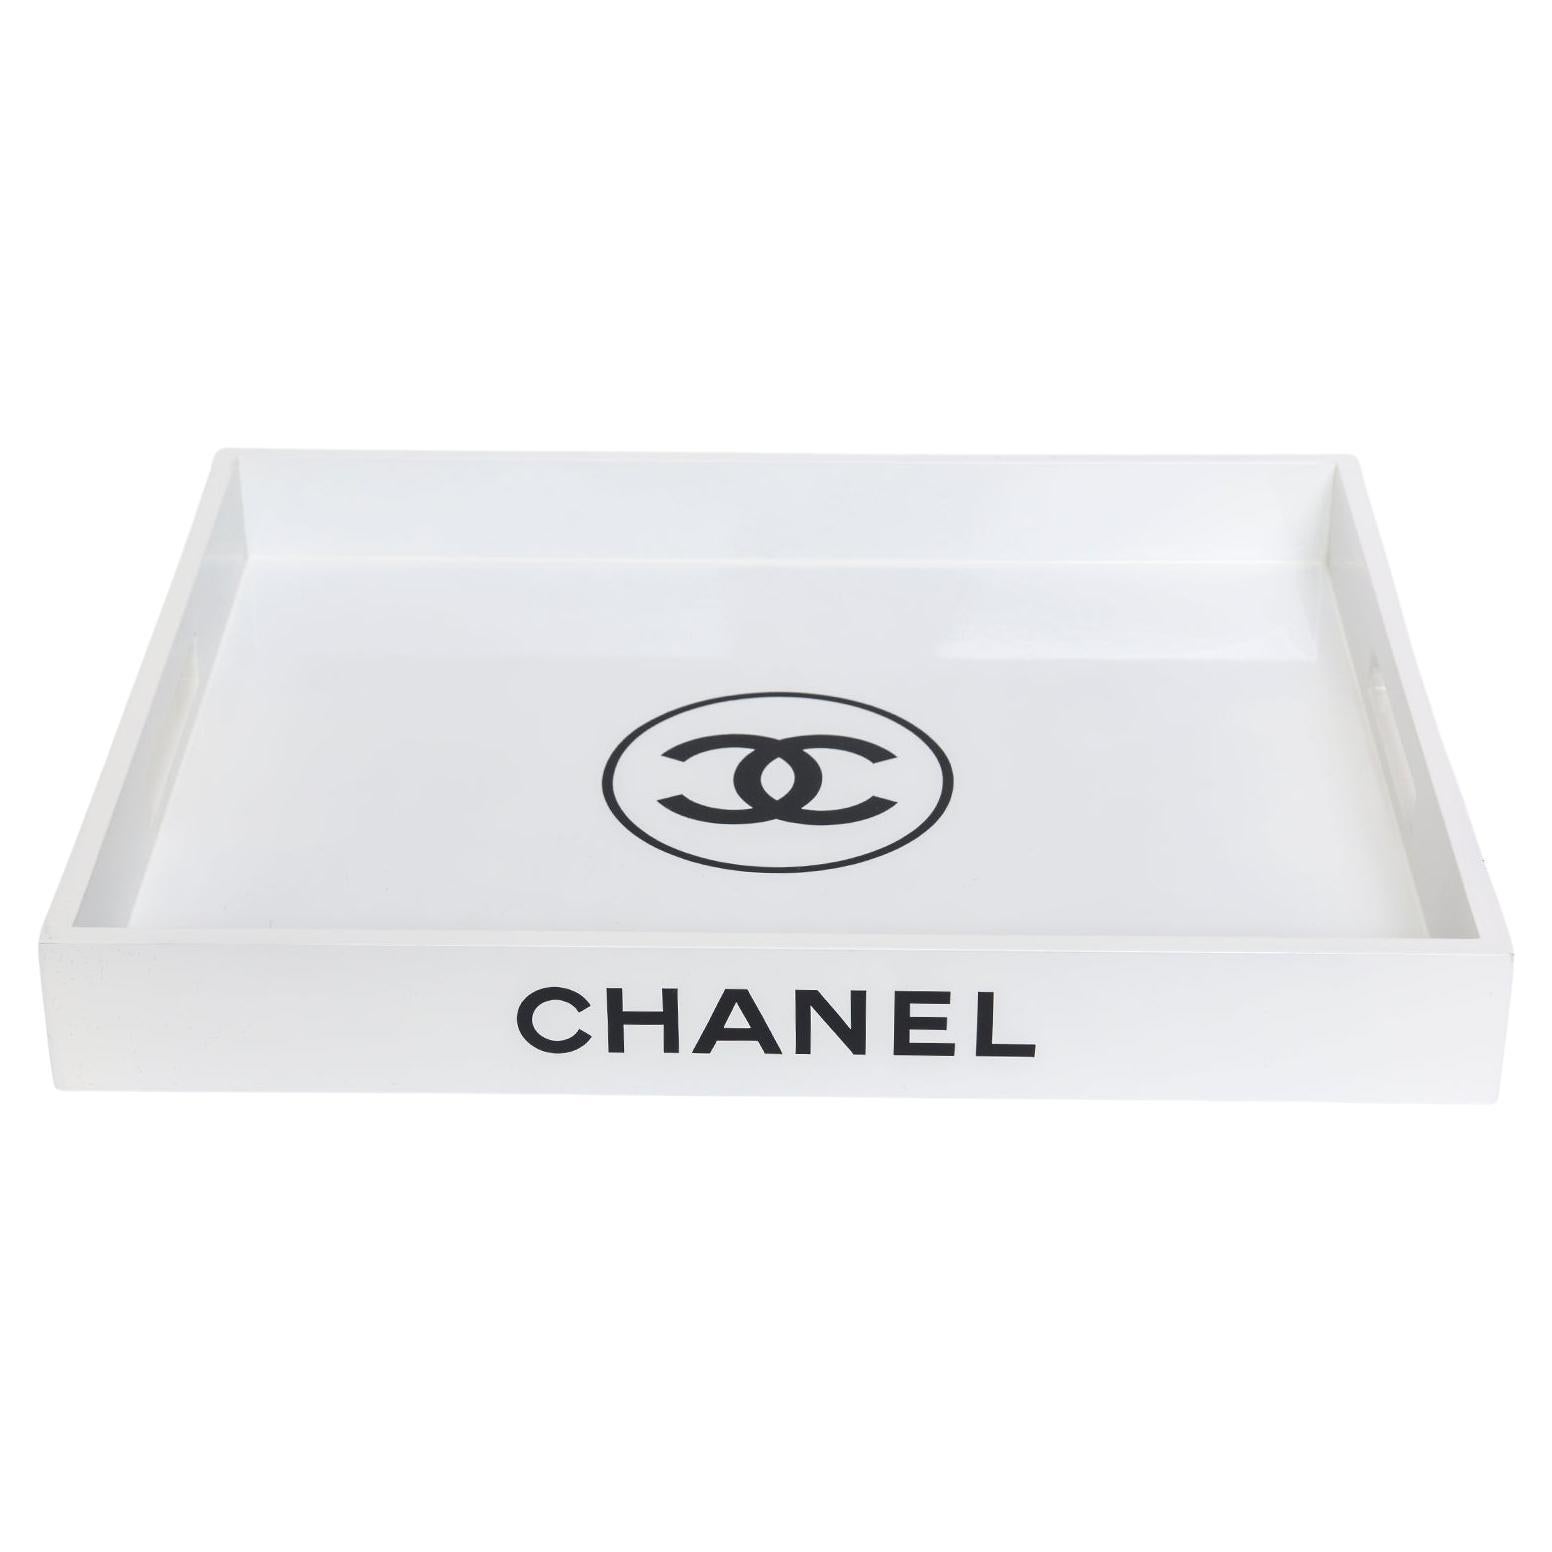 Contemporary White Lacquered Wood Rectangle Tray with Black Chanel Letters